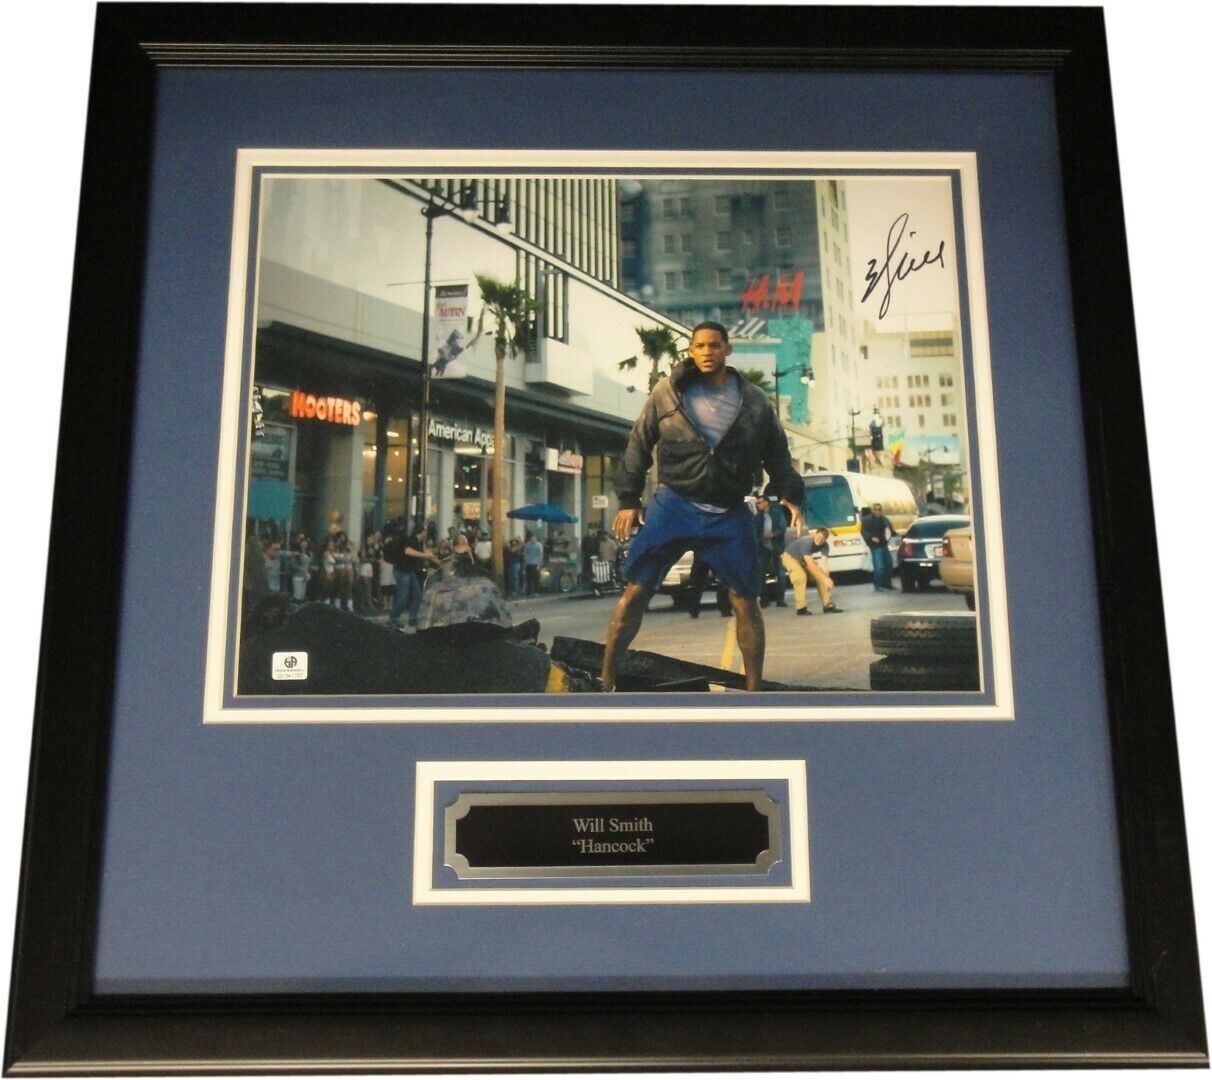 Will Smith Hand Signed Autographed Custom Framed 11x14 Photo Poster painting Hancock GA 541767